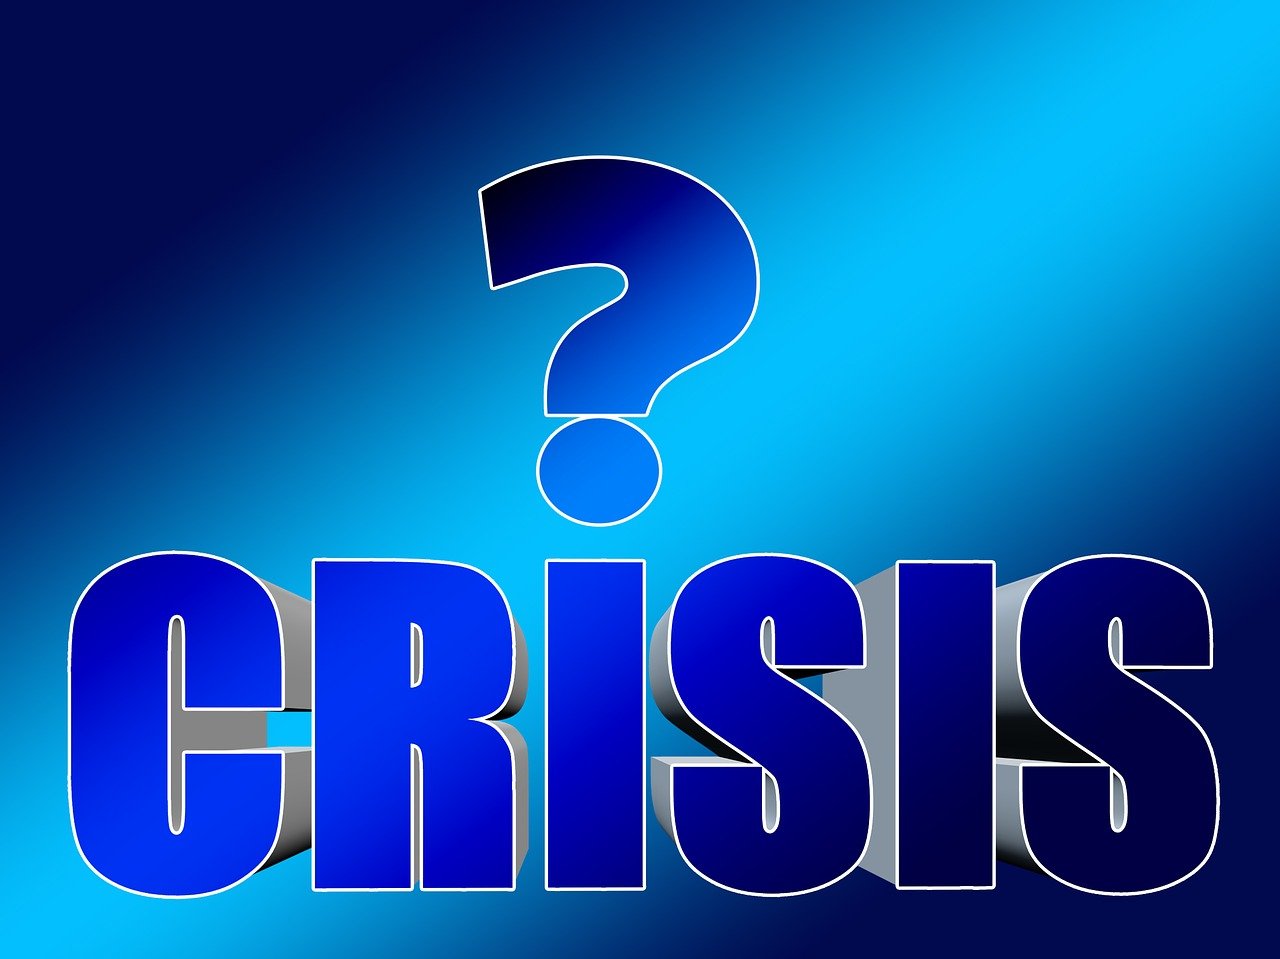 Managing Change in Times of Crisis